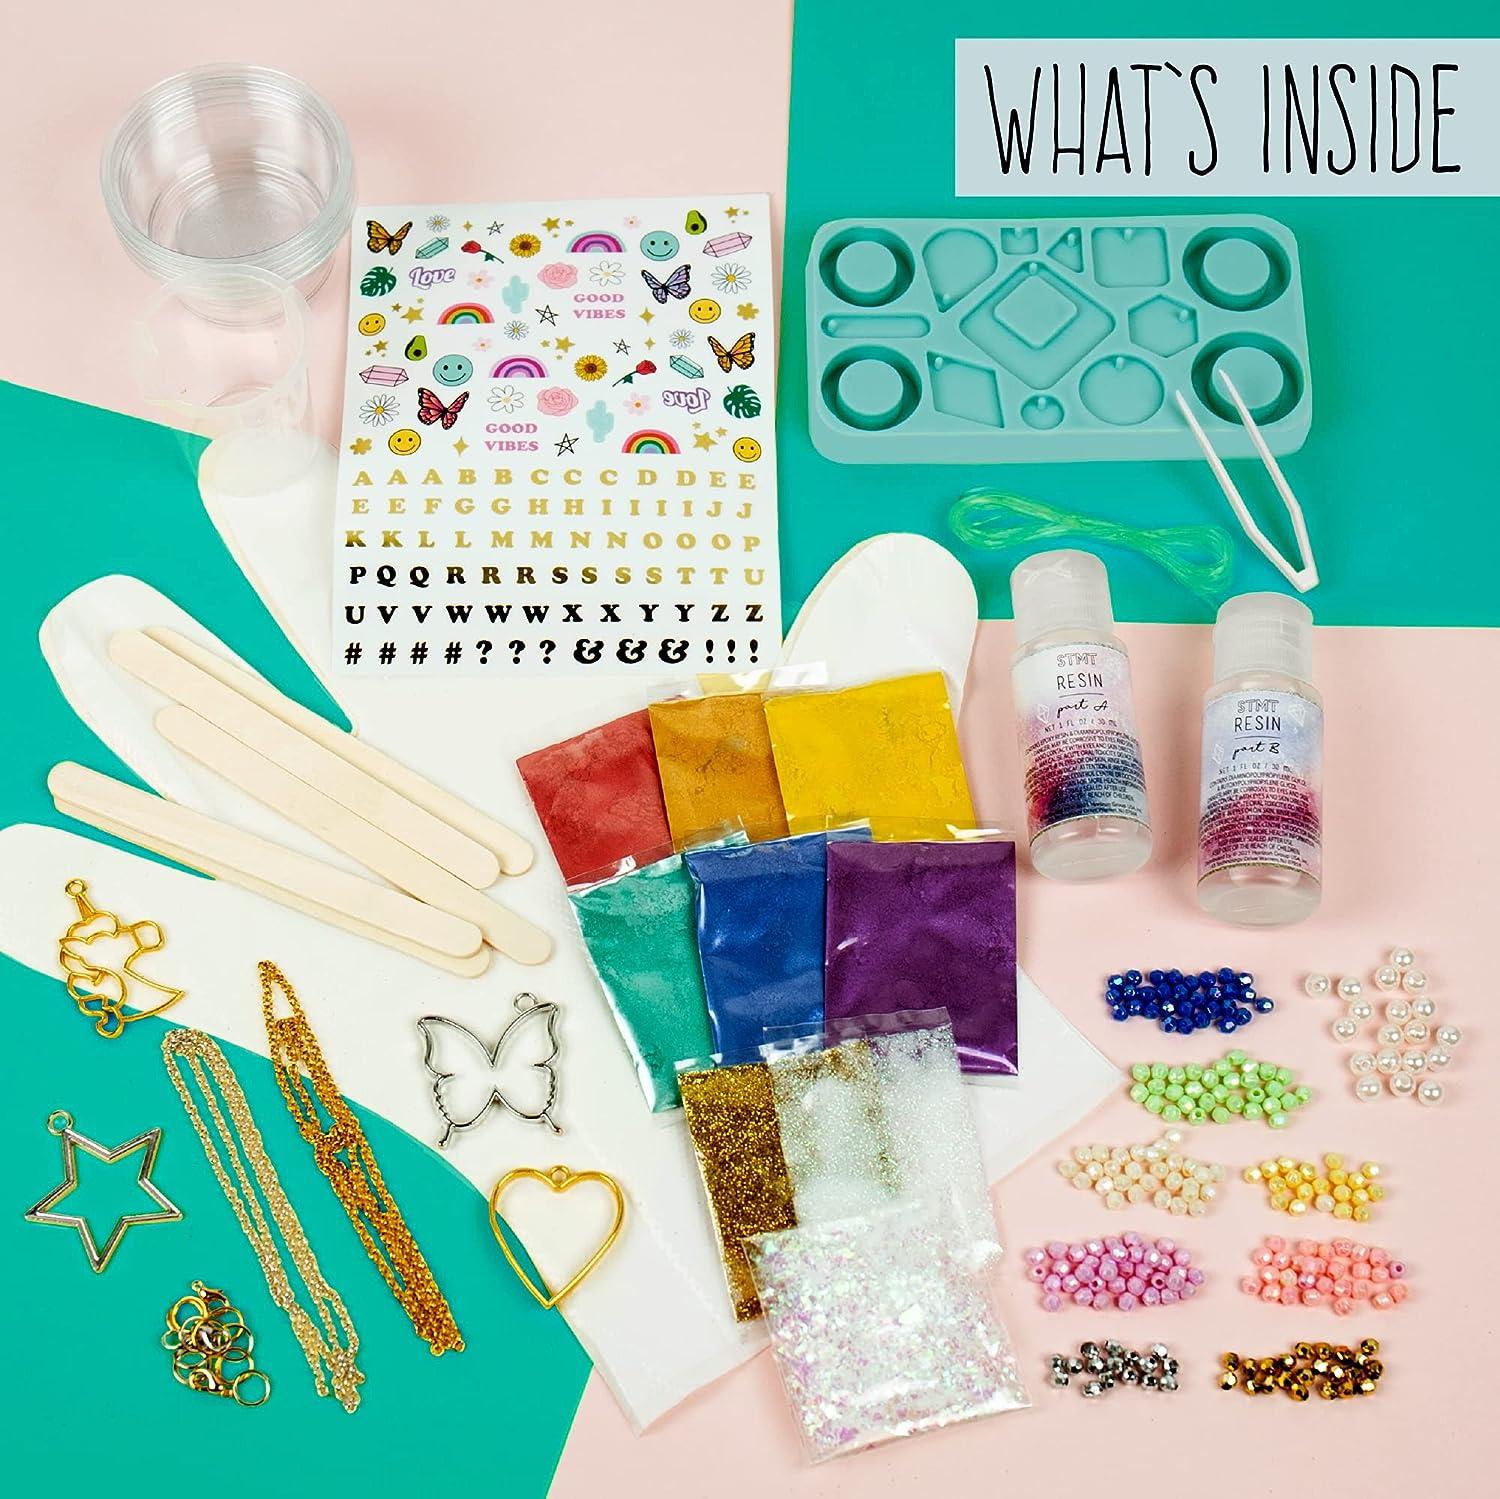 STMT D.I.Y. Resin Jewelry Studio All-in-One Resin Jewelry Making Kit with  Molds Fun DIY Kit to Make Your Own Necklaces Bracelets & More Great Gift  for Teen Girls 14+